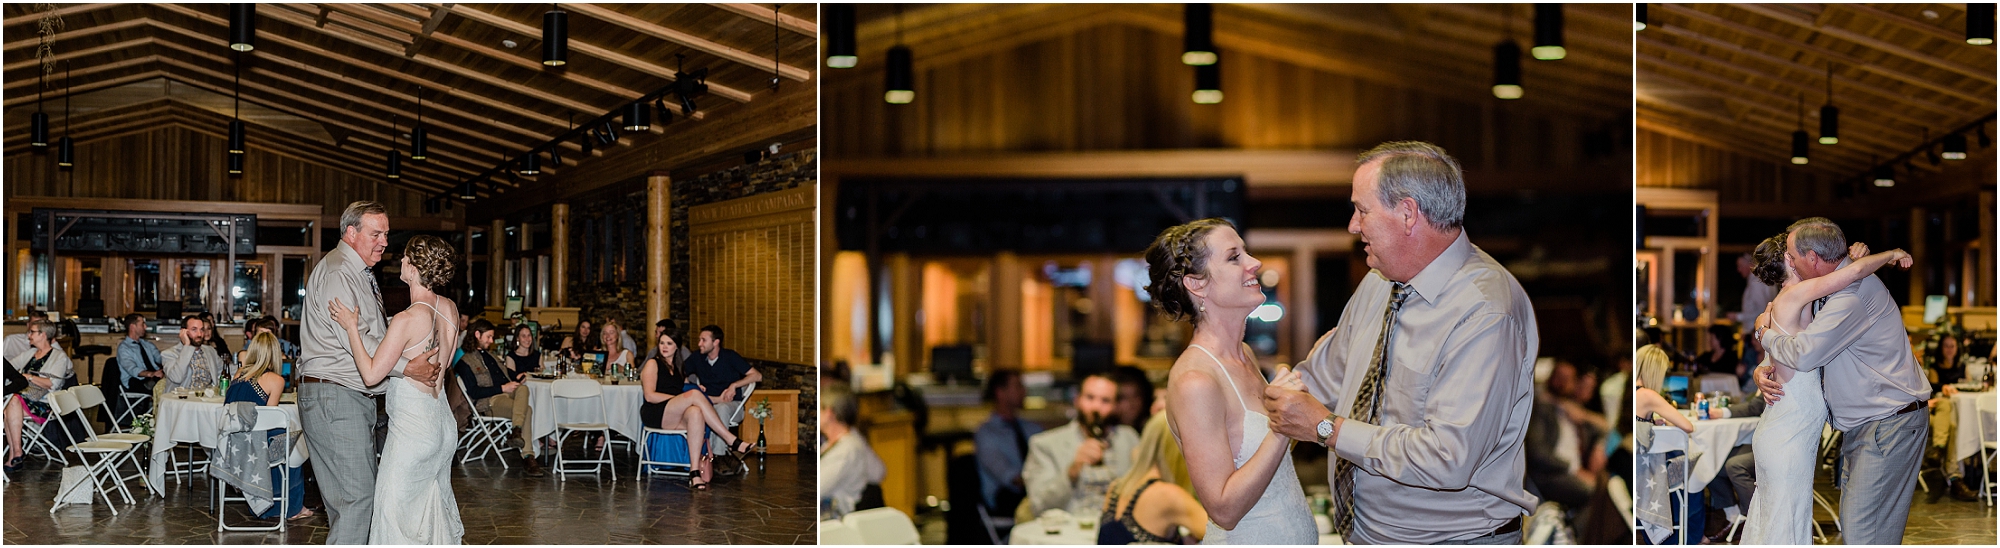 A father daughter wedding dance in Bend, Oregon's rustic museum wedding venue in Bend. | Erica Swantek Photography